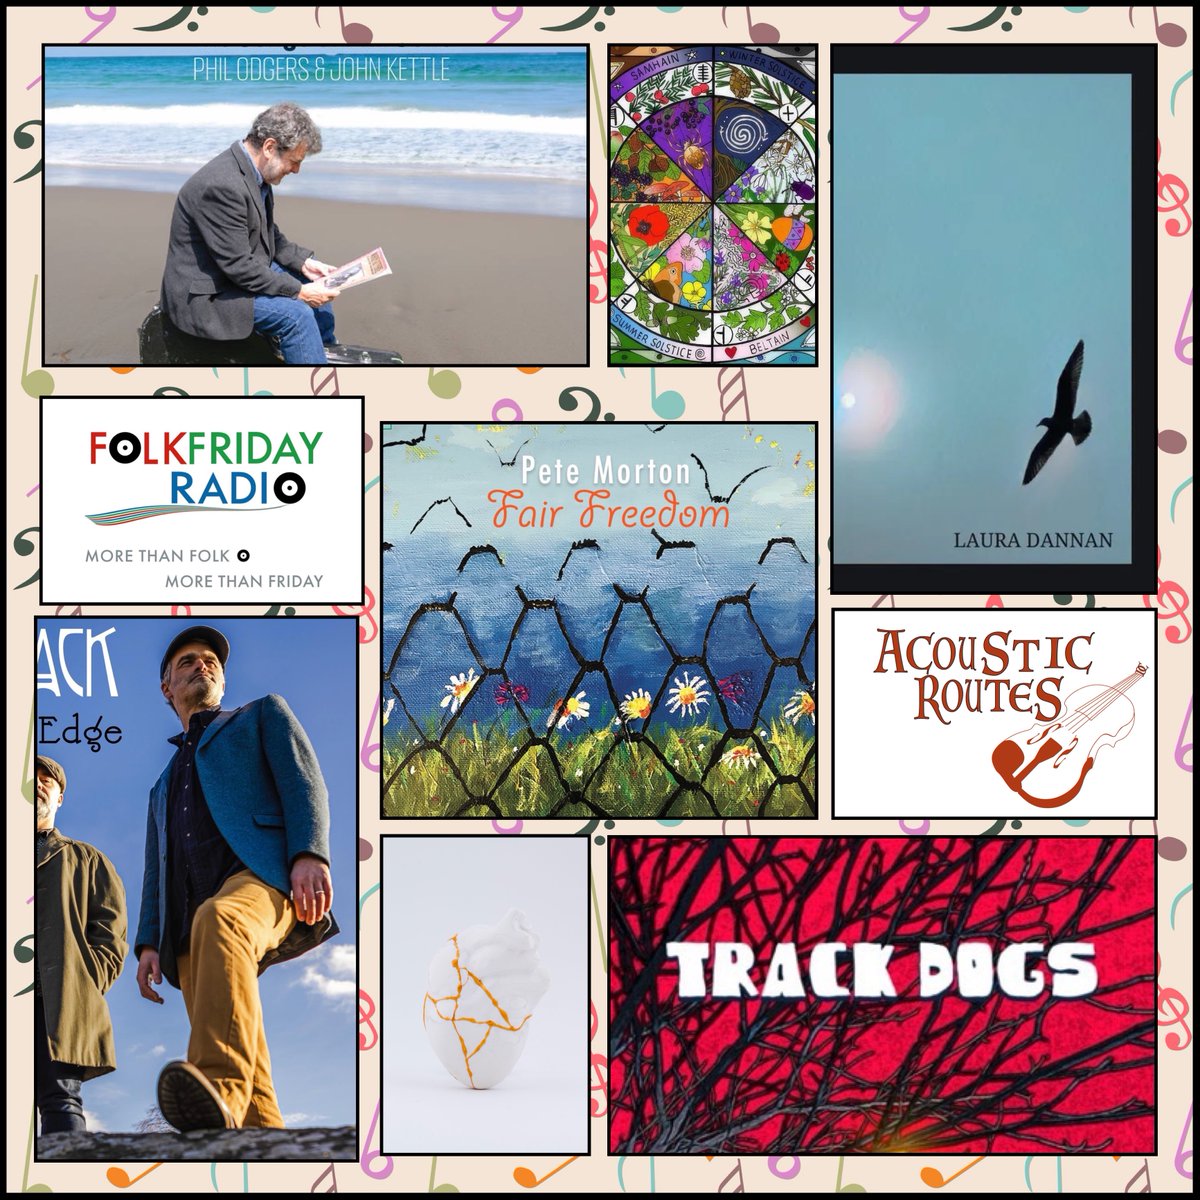 On this week’s @AcousticRoutes, show 493, the featured album is from @petemortonmusic & there will be music from @TangleJackBand @lauradannan @smalltownjones @TheCooleysBand @TrackDogsMusic @SwillOdgers @FaunOfficial and more. Tune in to @folkfridayradio 11pm U.K. time today